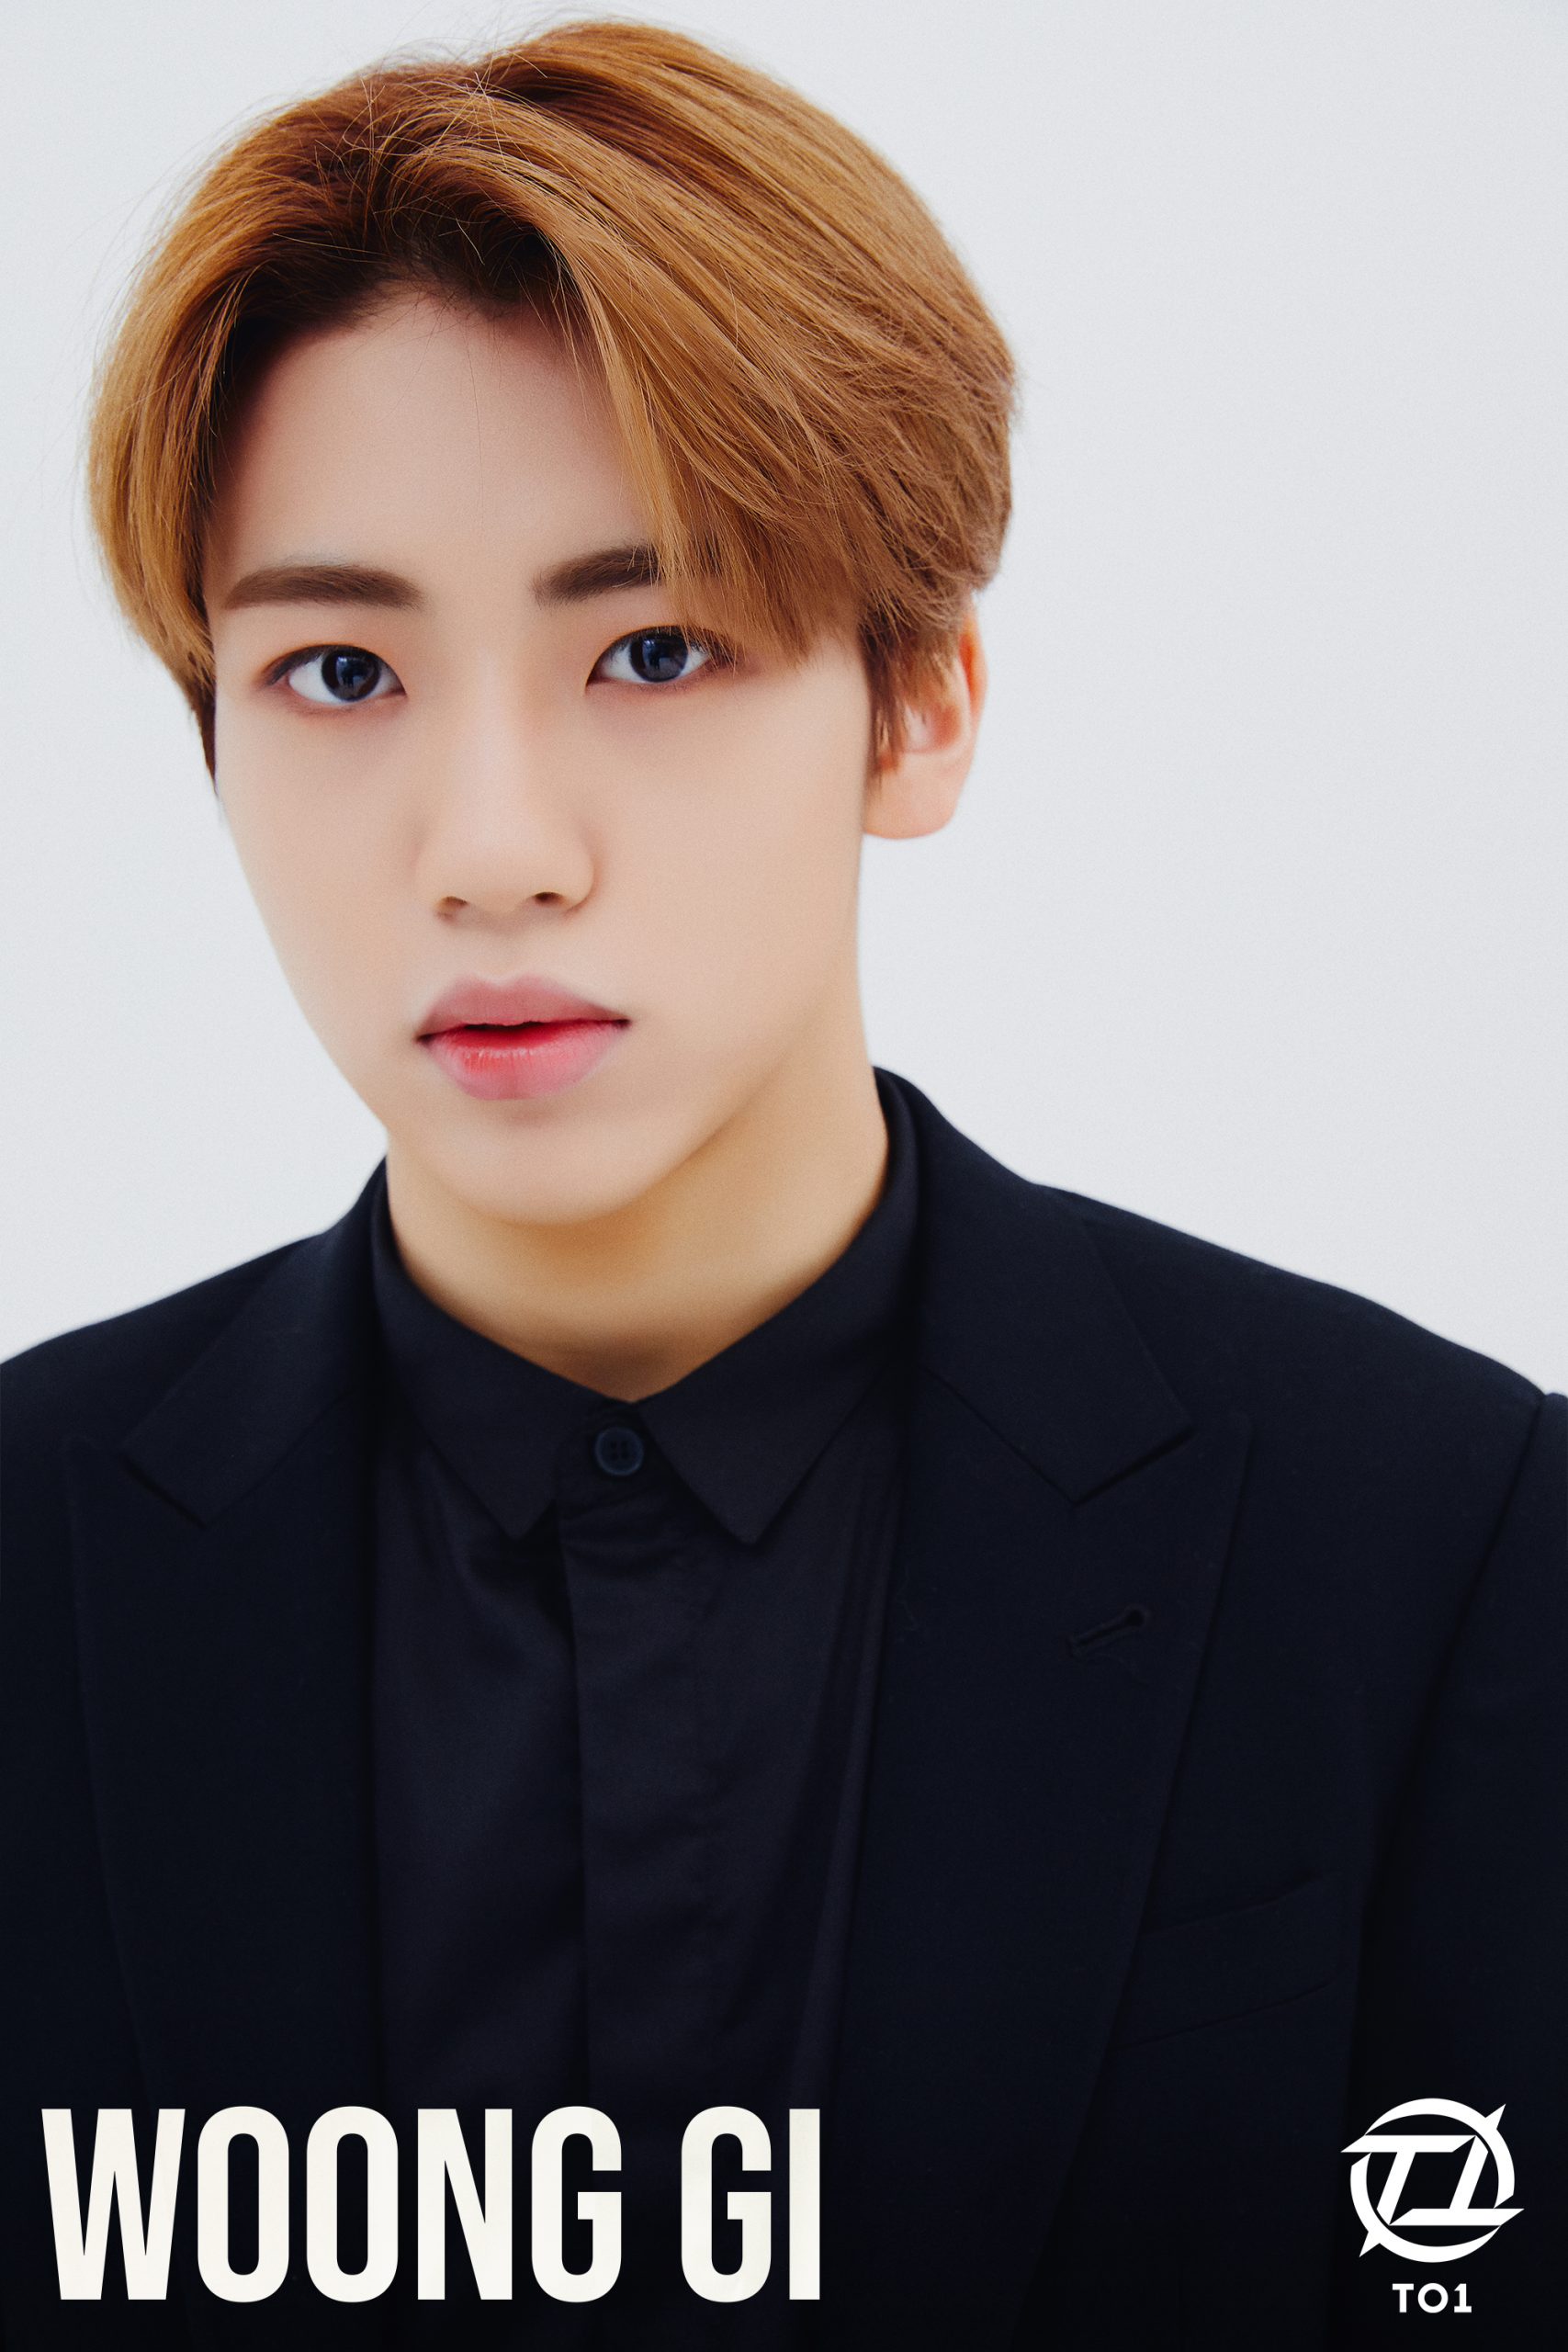 Woonggi (TO1 Member) Age, Bio, Wiki, Facts & More